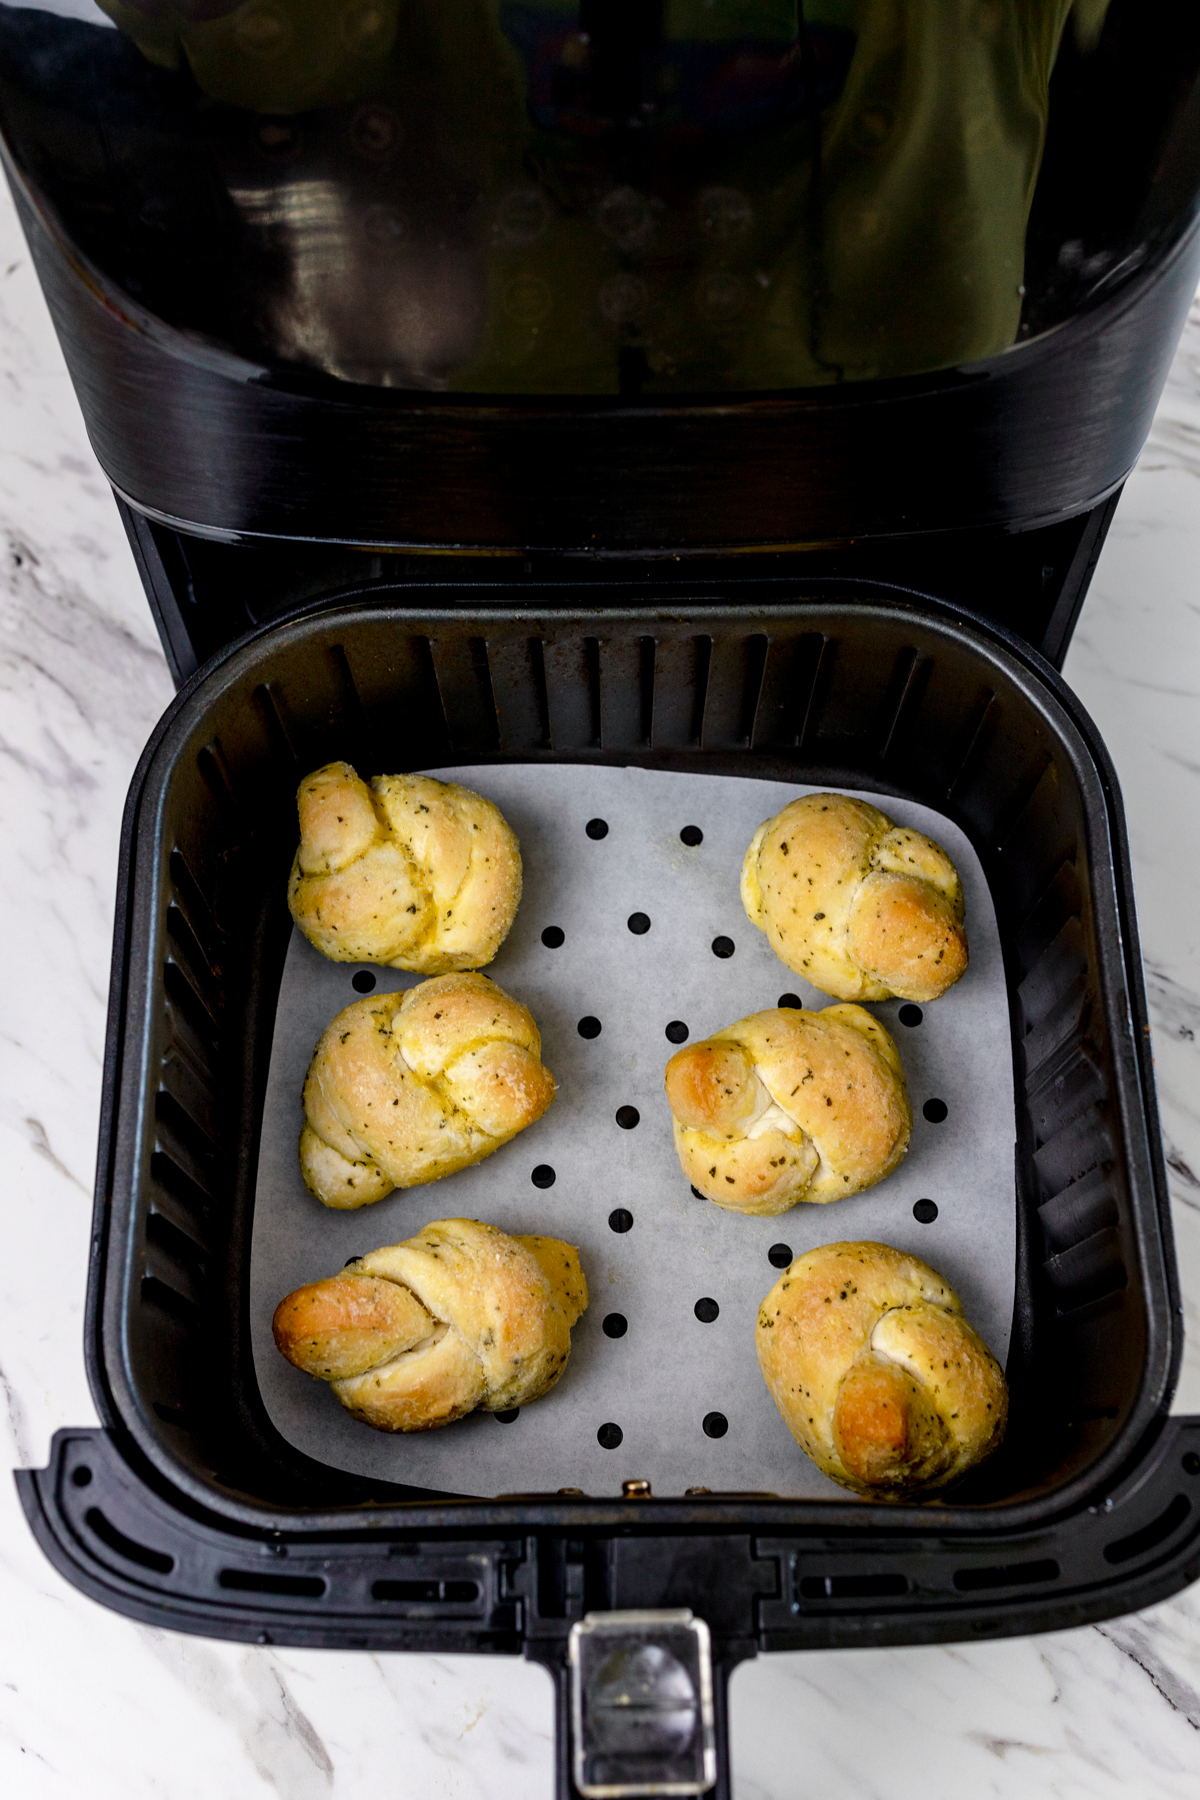 Top view of an air fryer basket pulled out from the air fryer with parchment paper lined on the bottom and frozen garlic knots placed in a single layer on the bottom.